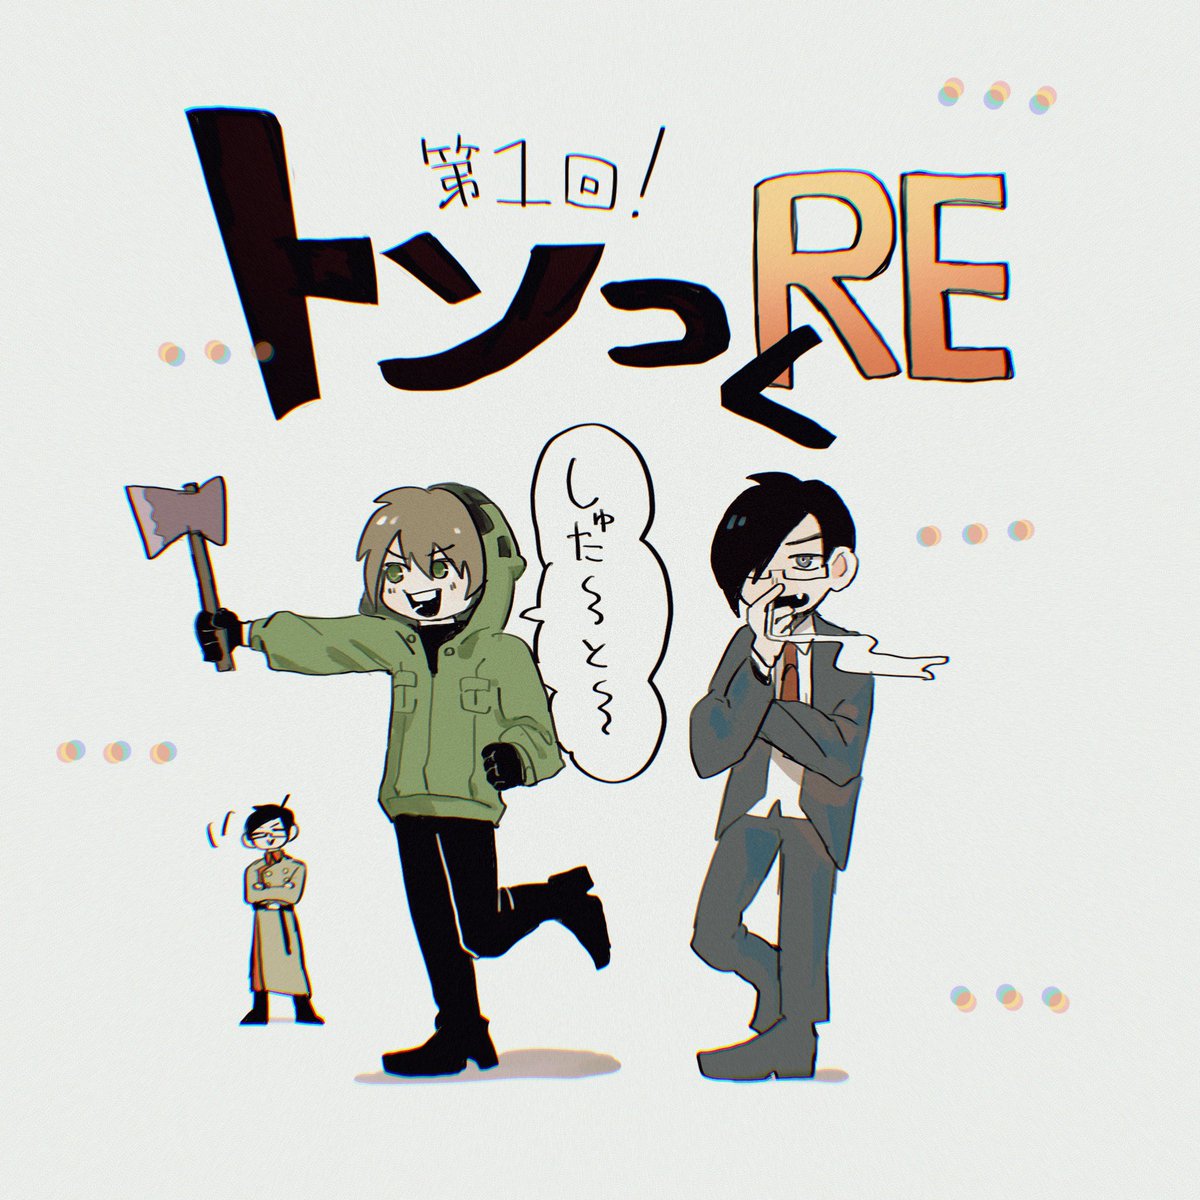 RE!? 